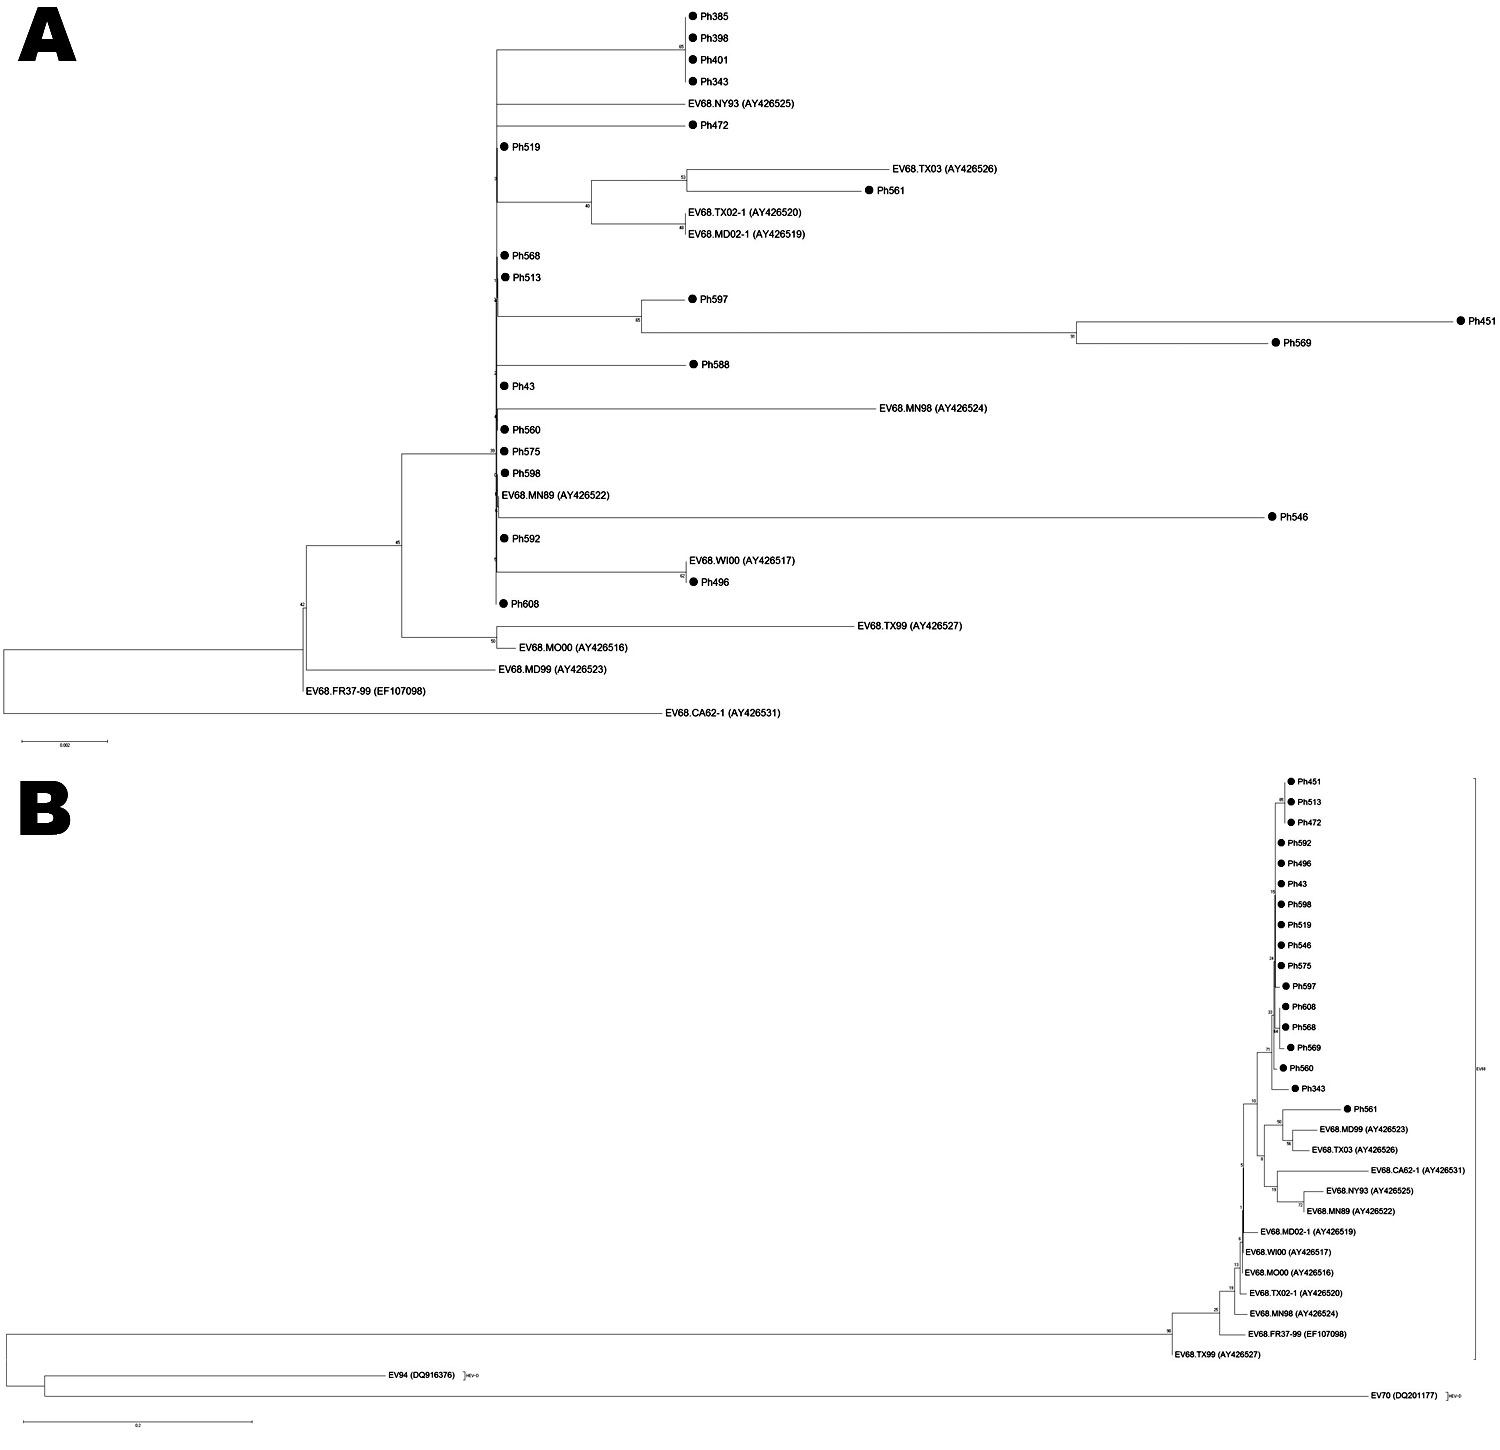 Phylogenetic trees of selected enterovirus (EV) 68 strains, based on the nucleotide sequence of 2 genomic regions: A) partial 5′ nontranslated region and B) partial viral protein 1. EV68 strains analyzed in this study are indicated by black circles. Phylogenetic analysis was performed by using nucleotide alignments and the neighbor-joining method, as implemented in MEGA software (www.megasoftware.net). Poliovirus 1, EV70, and EV94 sequences were used as outgroups. Scale bar indicates number of n